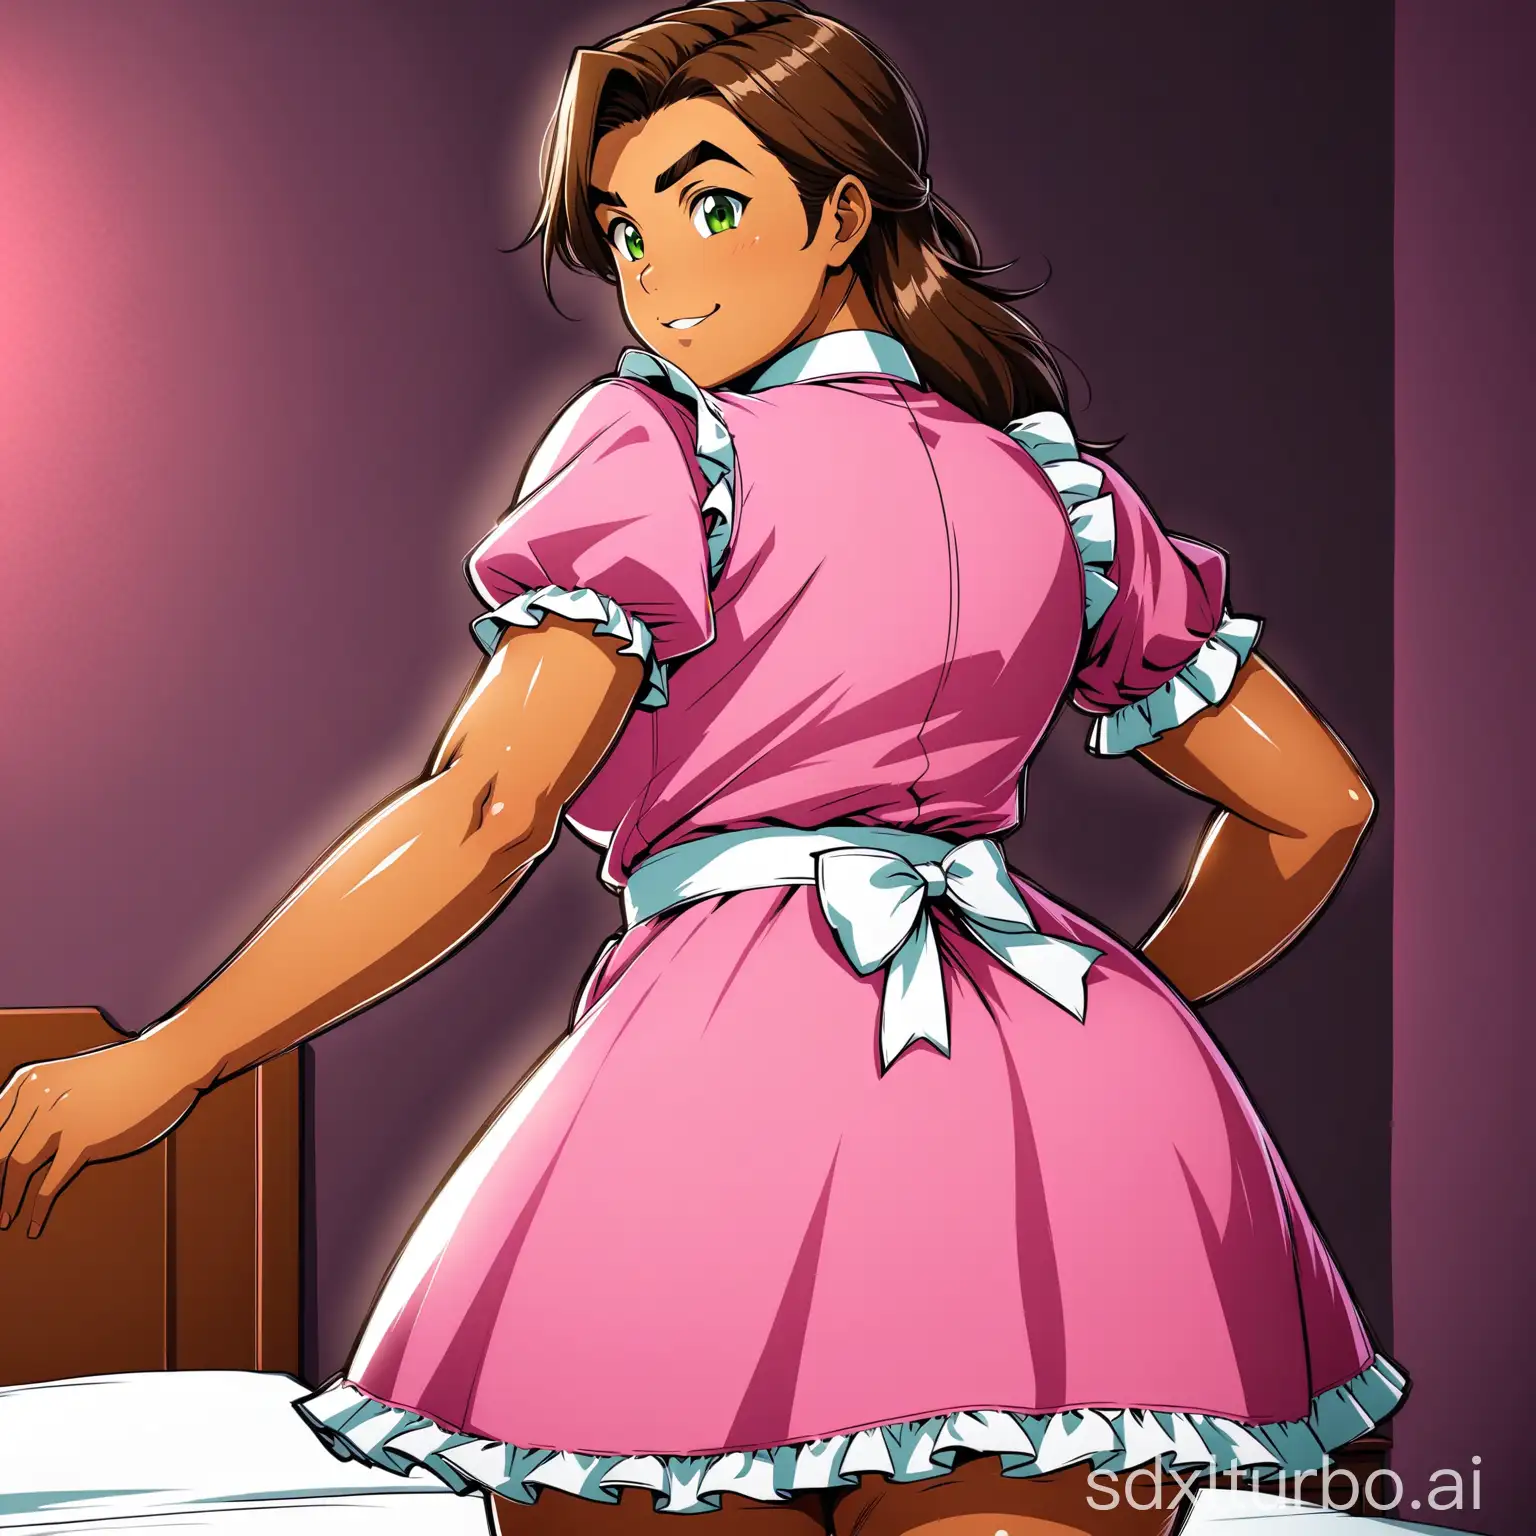 A handsome tanned chubby young man, mullet brown hair, green eyes, with pink maid uniform, dancing, showing ass, in a dark bedroom